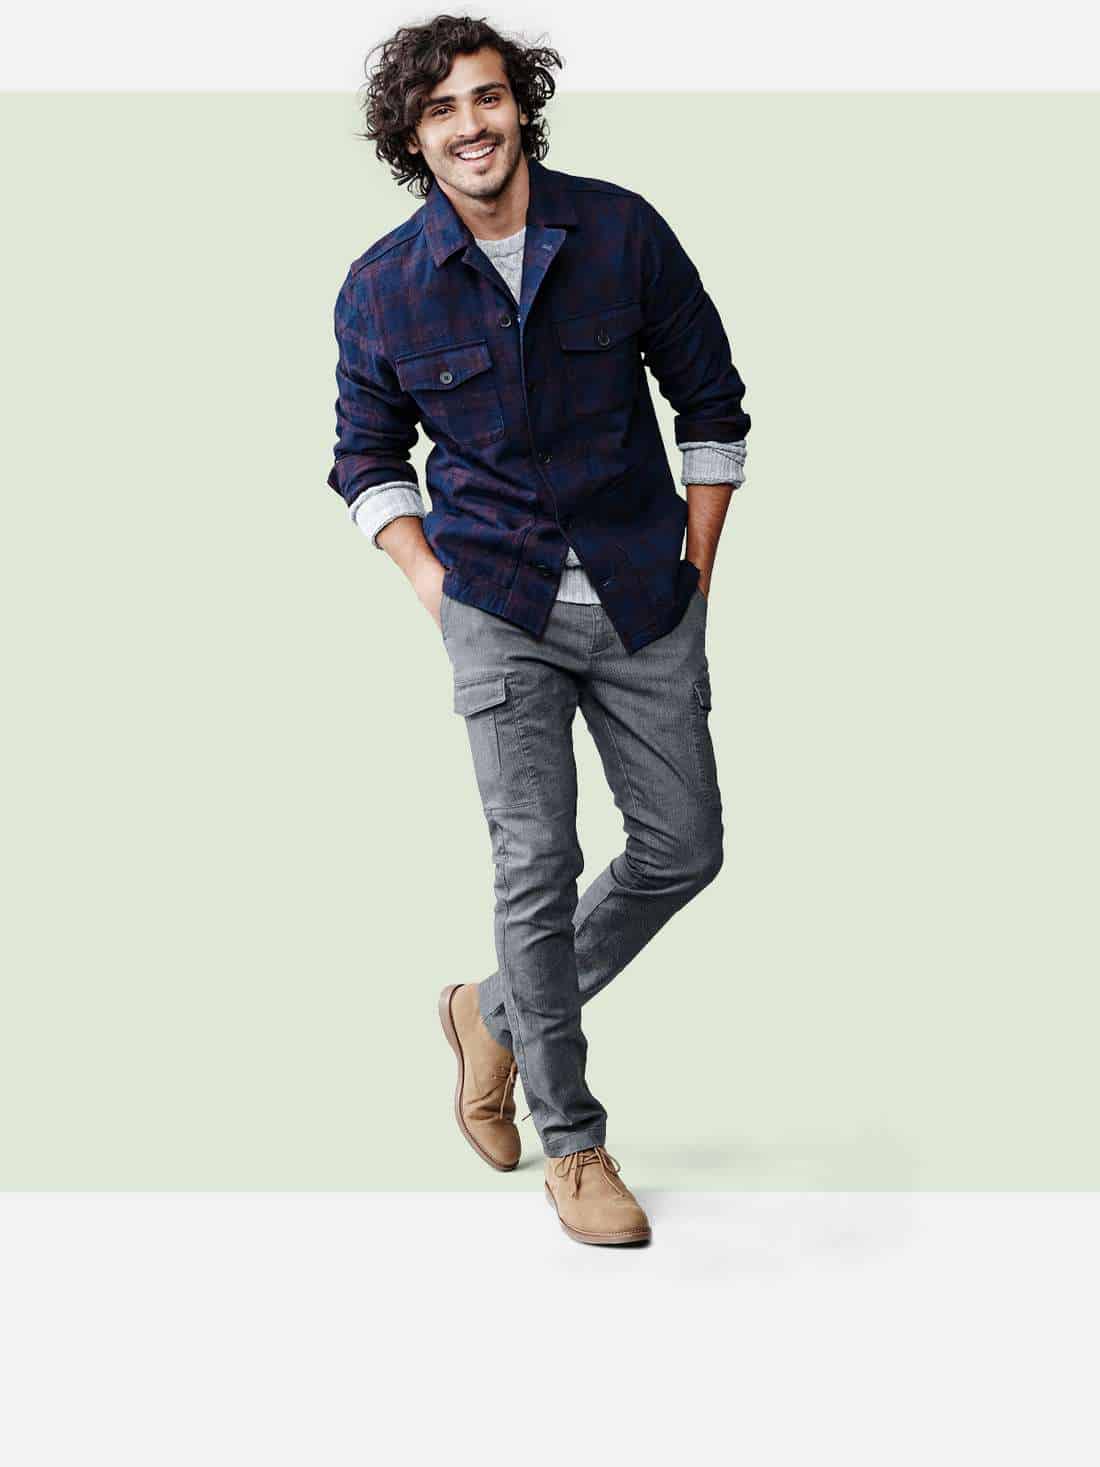 A man modeling shirts and pants from Target